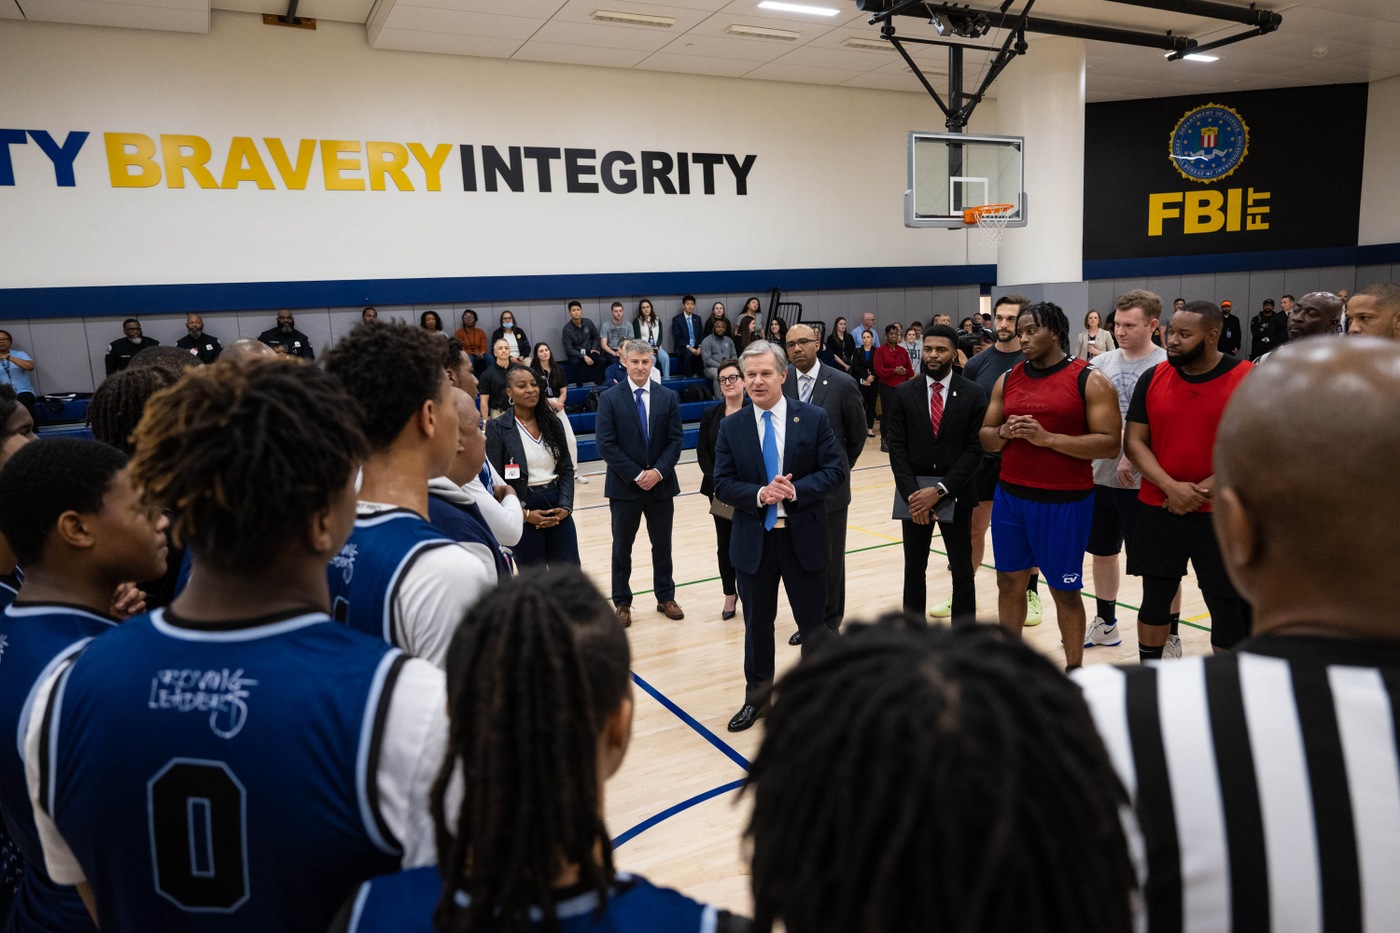 Director Christopher Wray addresses teams before their match during a WFO community outreach event at FBI Headquarters on January 24, 2024.